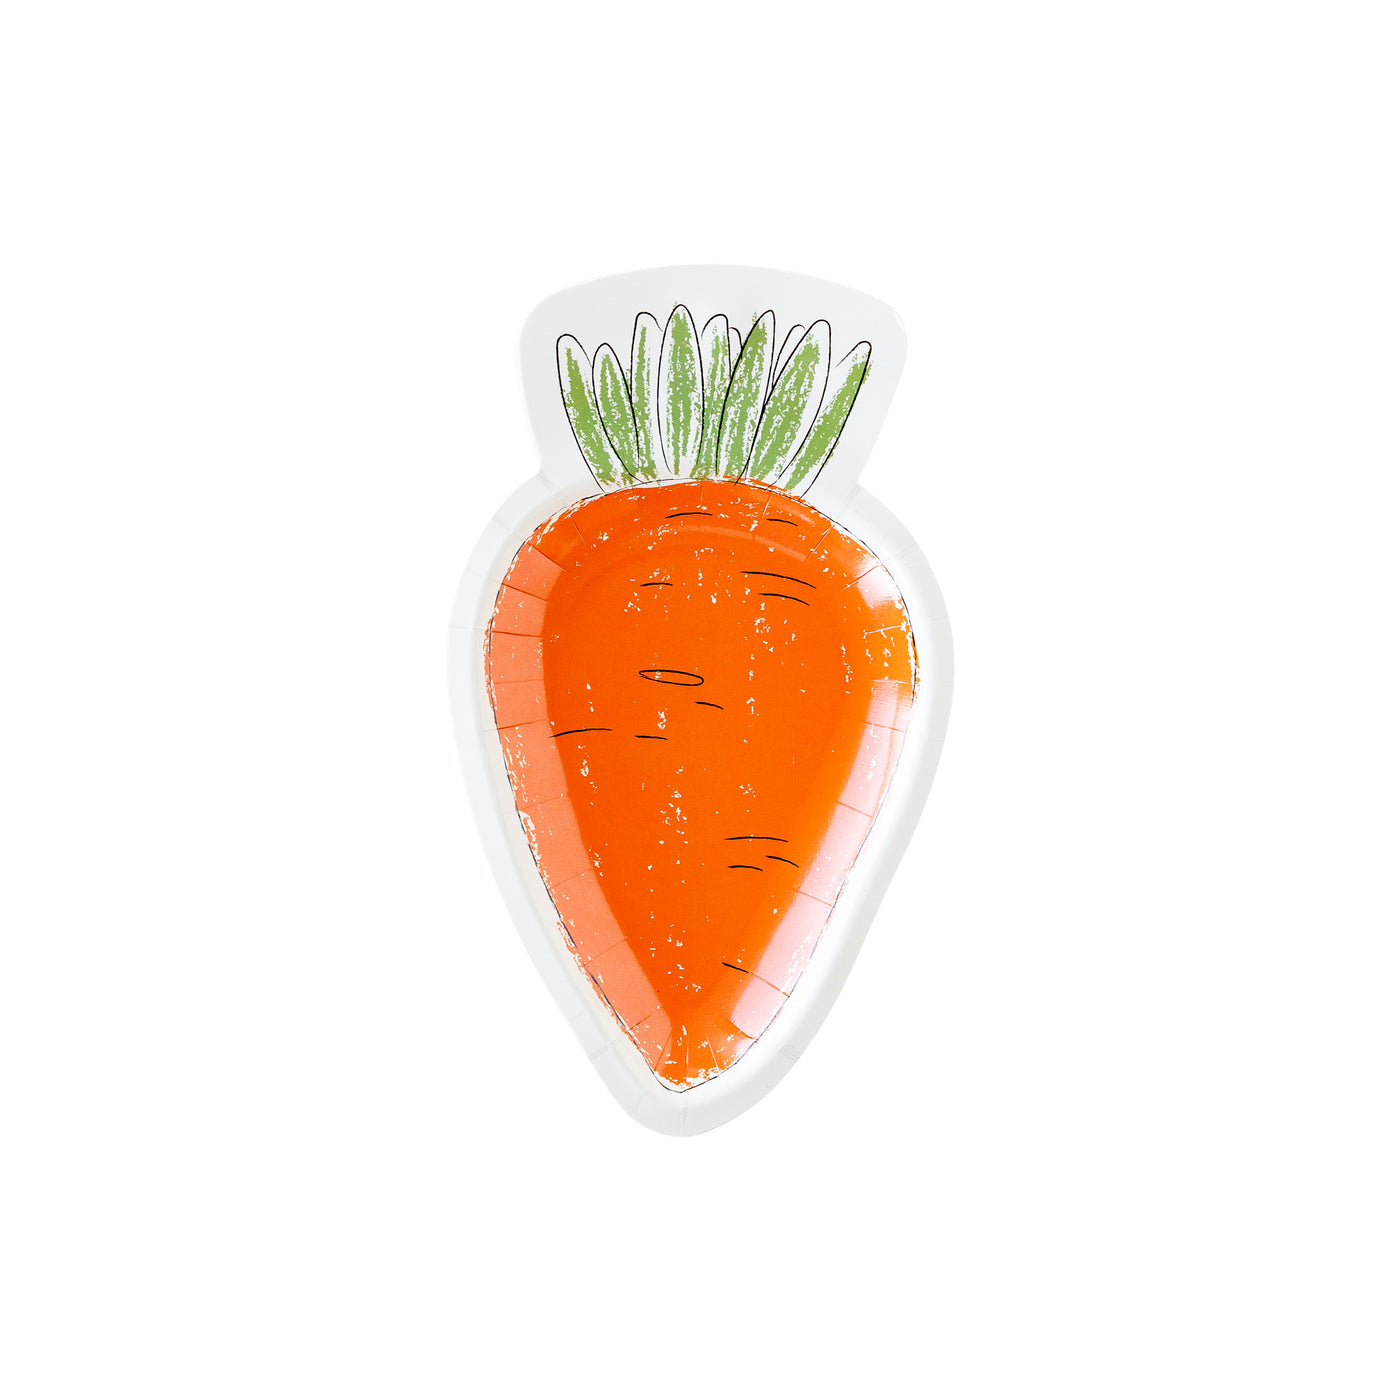 PLTS358o - Sketchy Carrot Shaped Plate